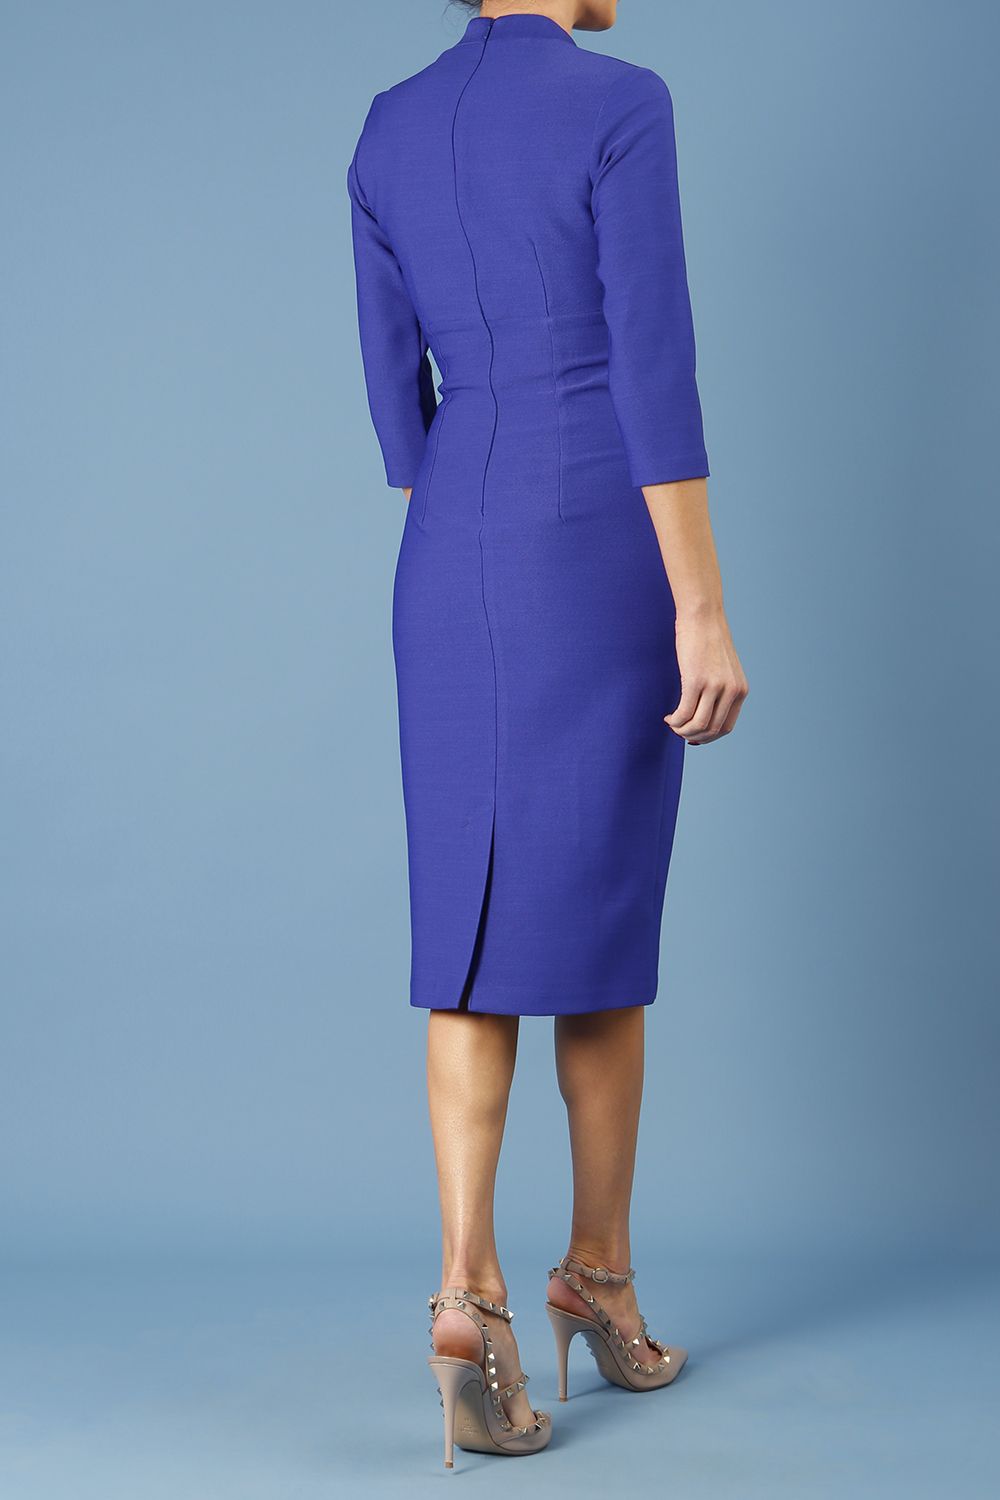 model is wearing diva catwalk seed holsworthy pencil dress with pleating on a tummy area and high neck with sleeves in palace blue back